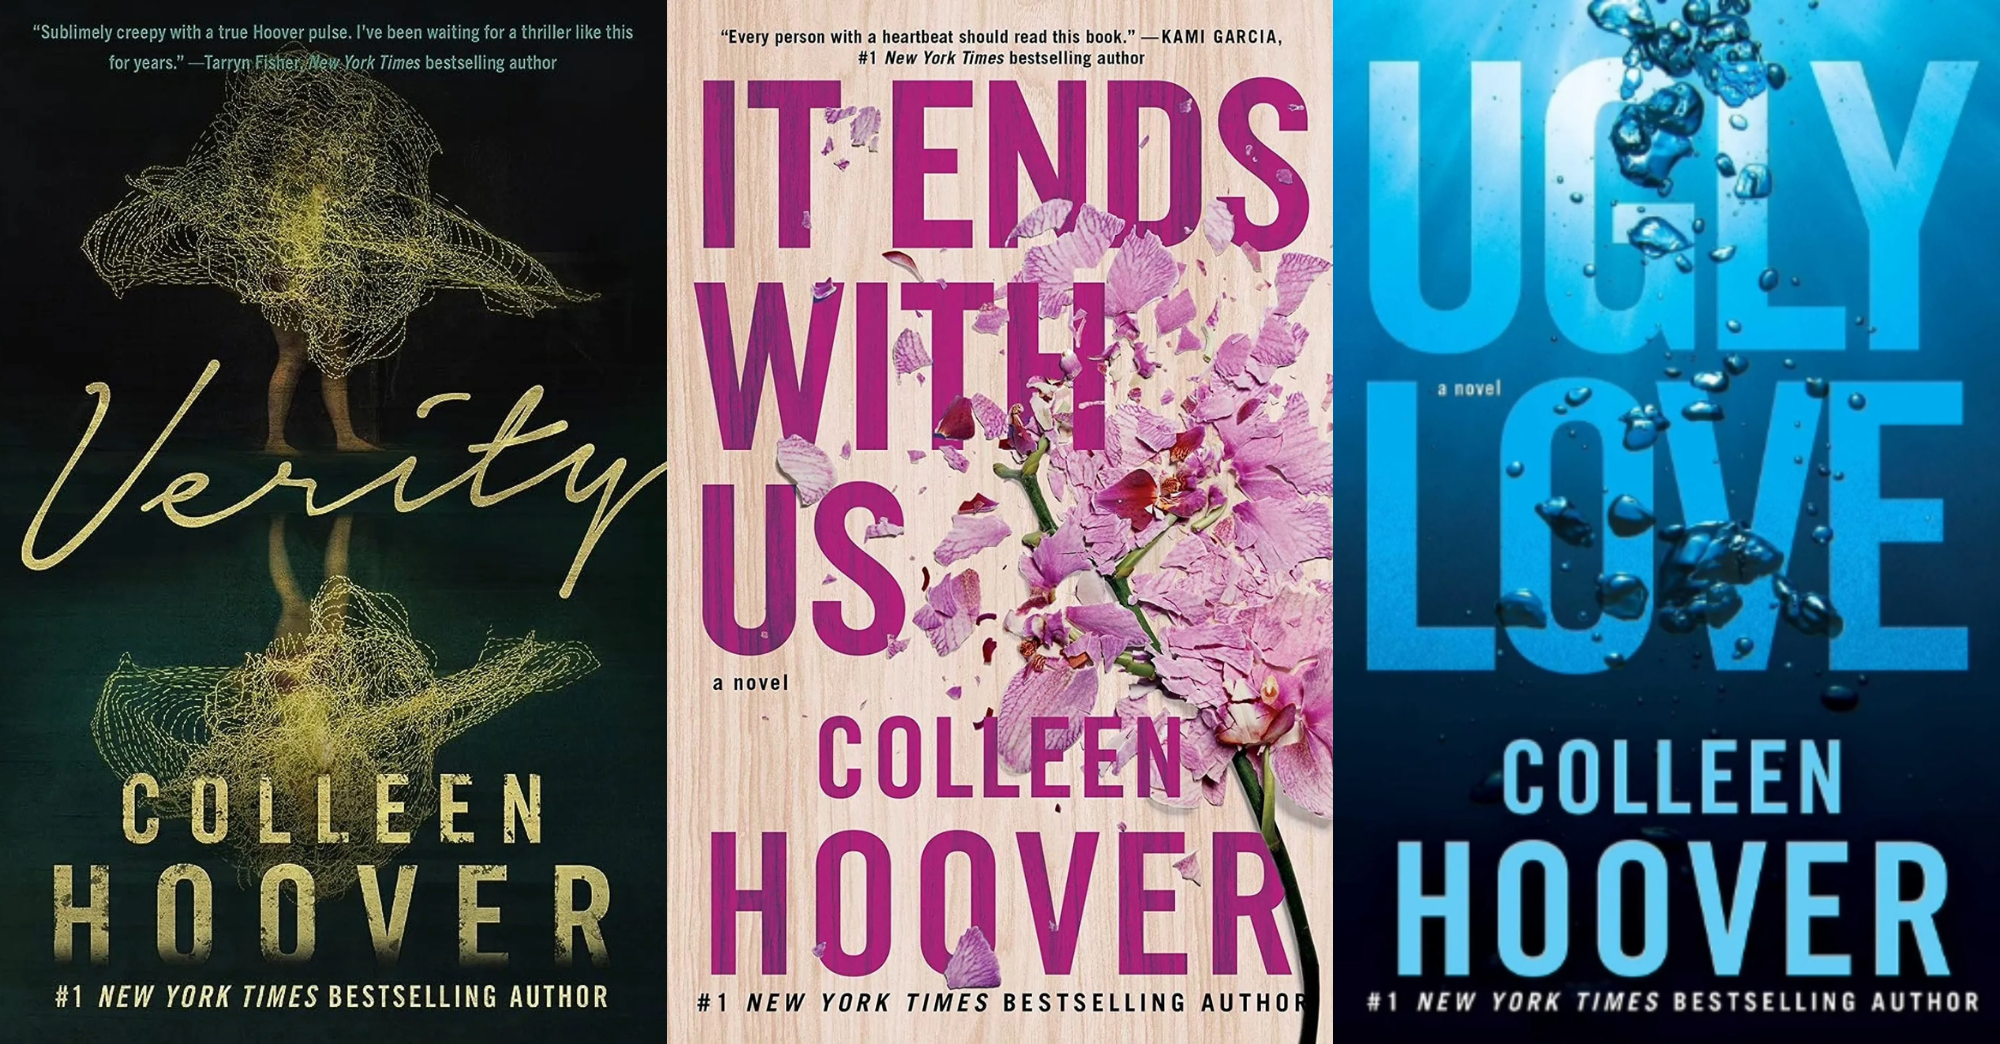 colleen hoover books ranked